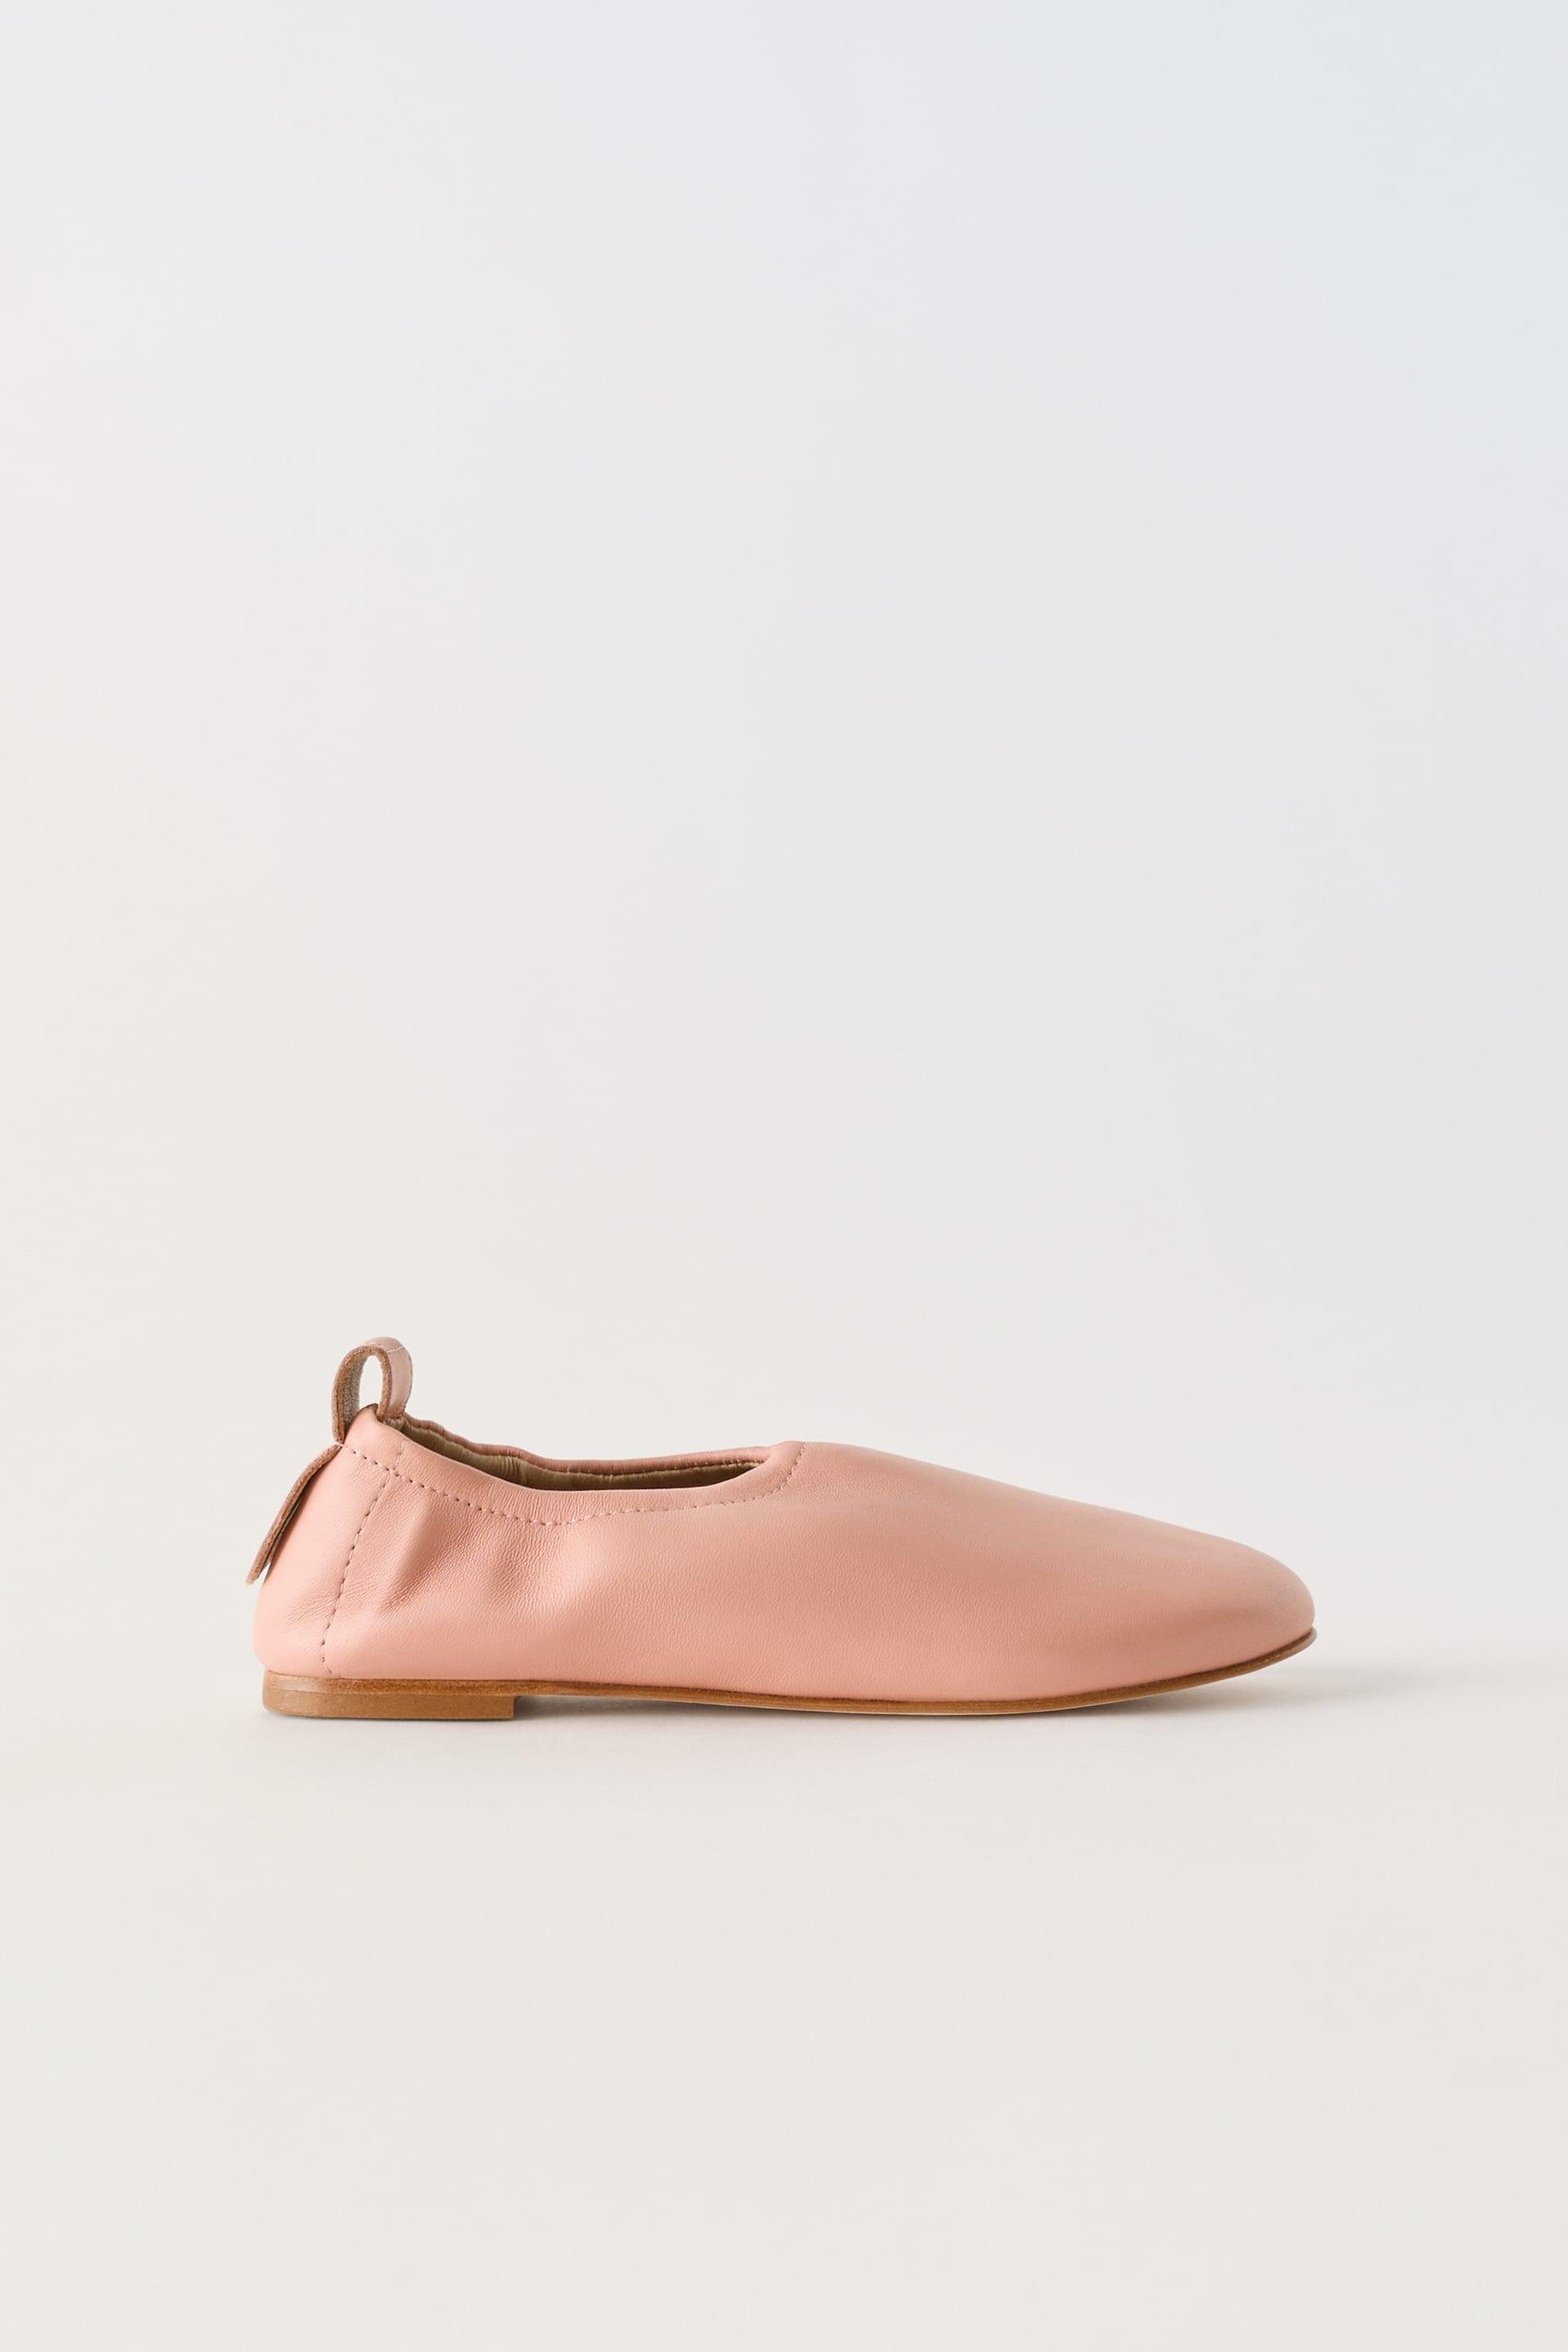 LEATHER SLIPPERS by ZARA